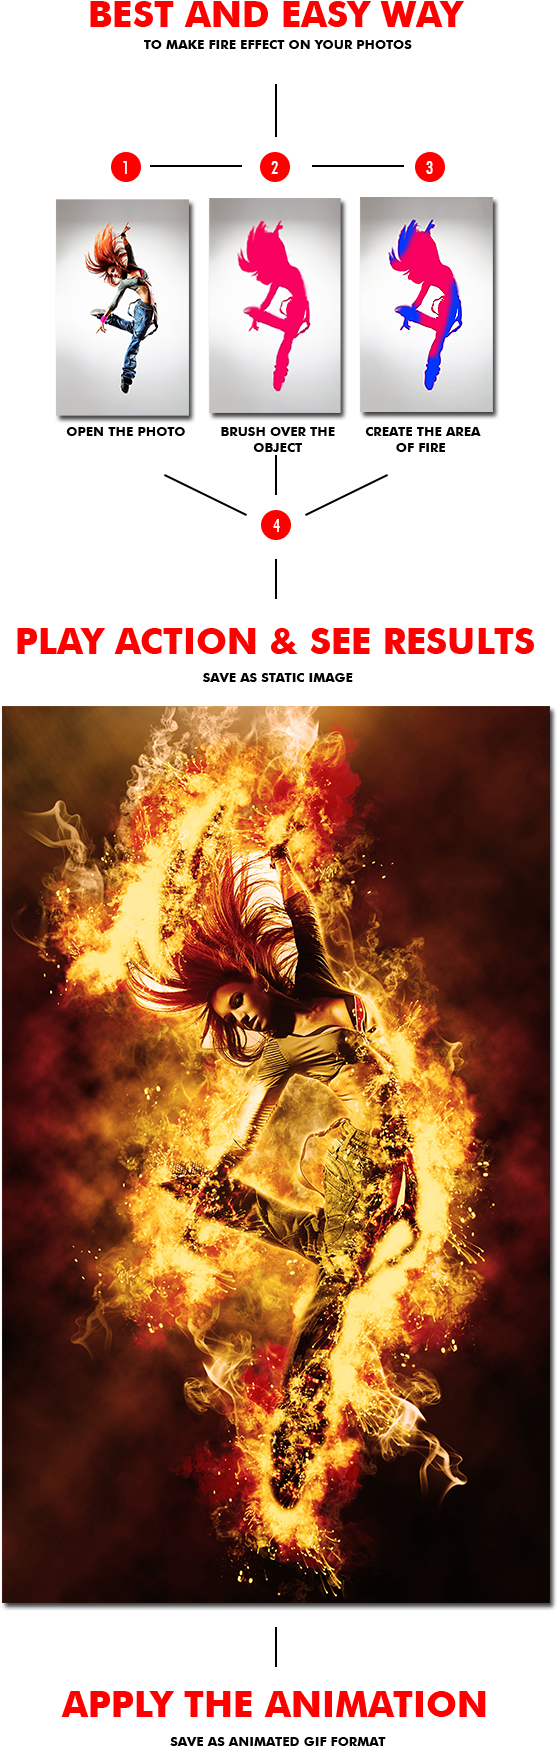 Download Gif Animated Fire Photoshop Action - Poster PNG Image with No  Background 